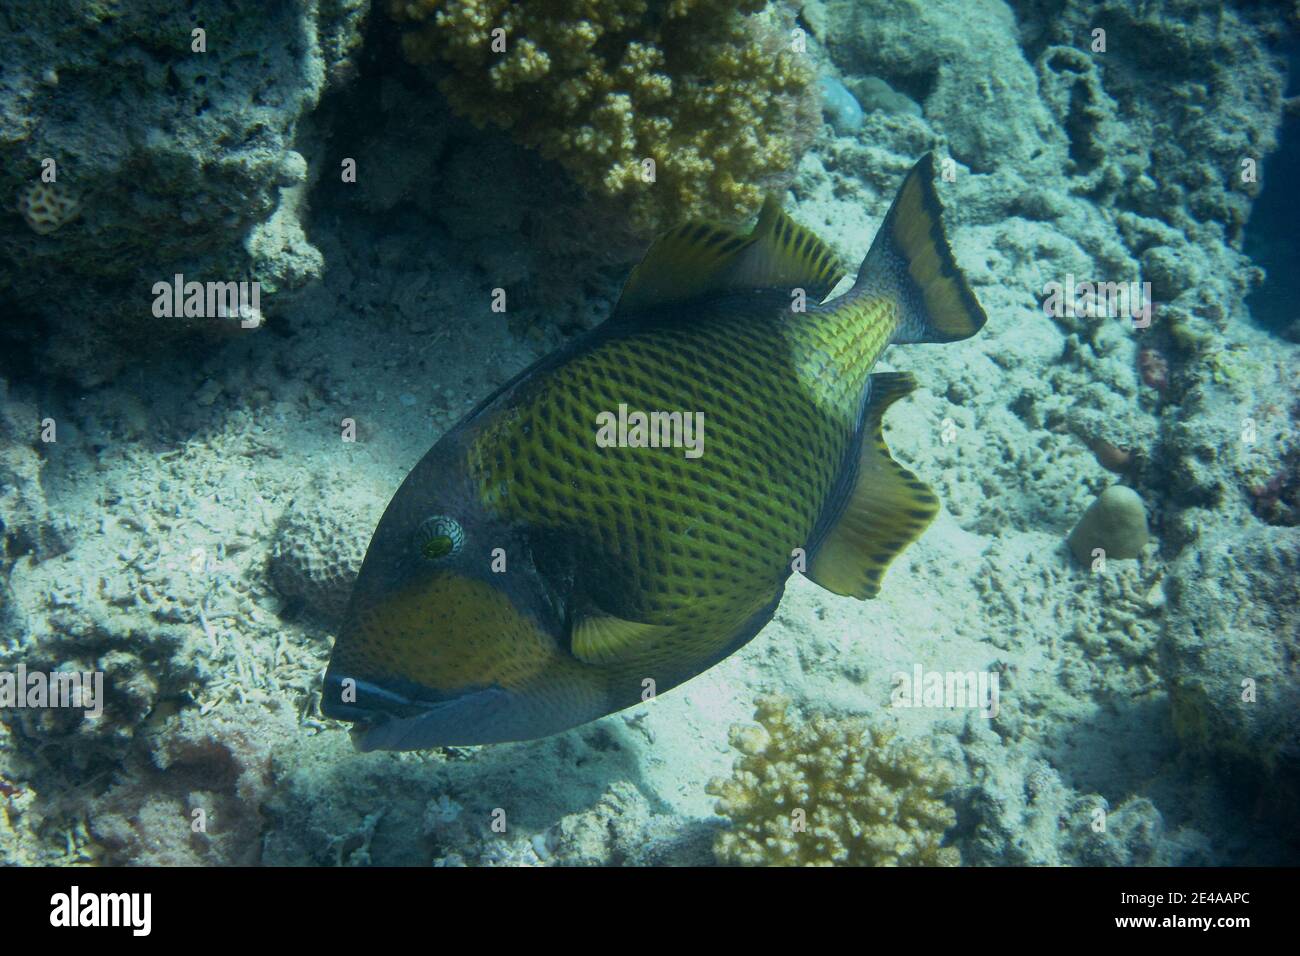 big giant triggerfish on coral reef in ocean Stock Photo